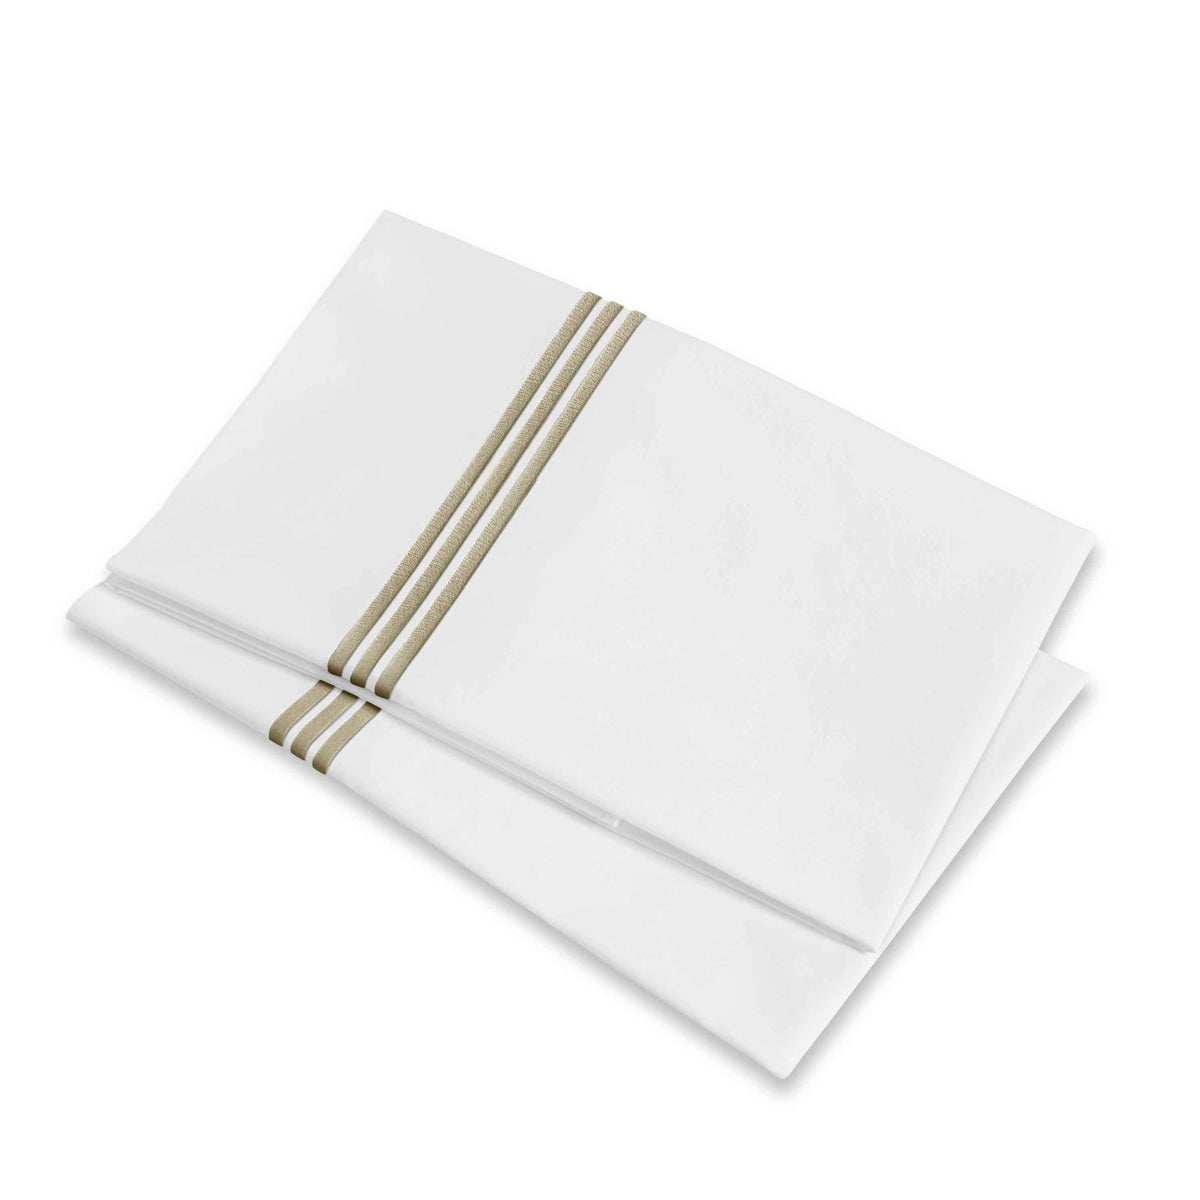 Folded Pillowcases of Signoria Platinum Percale Bedding in White/Taupe Color